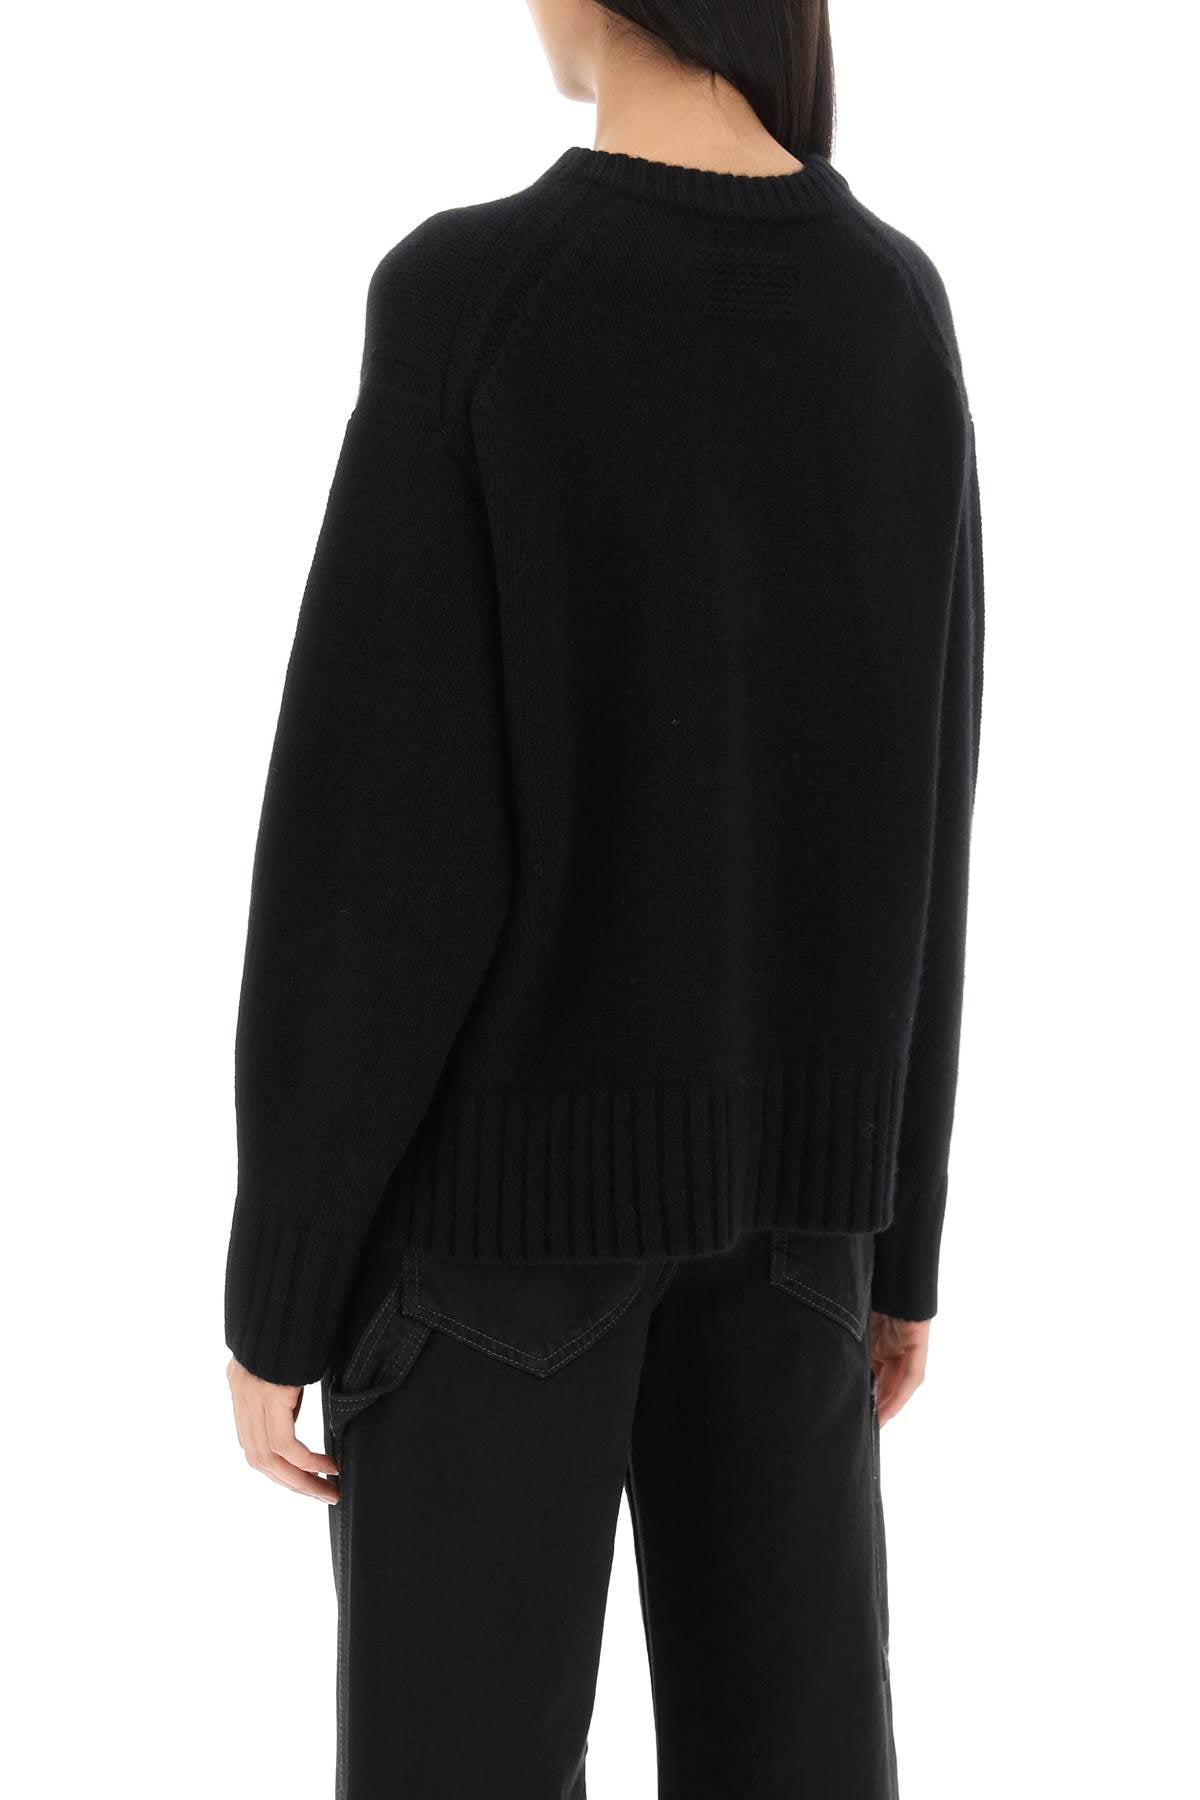 Guest in residence crew-neck sweater in cashmere-2